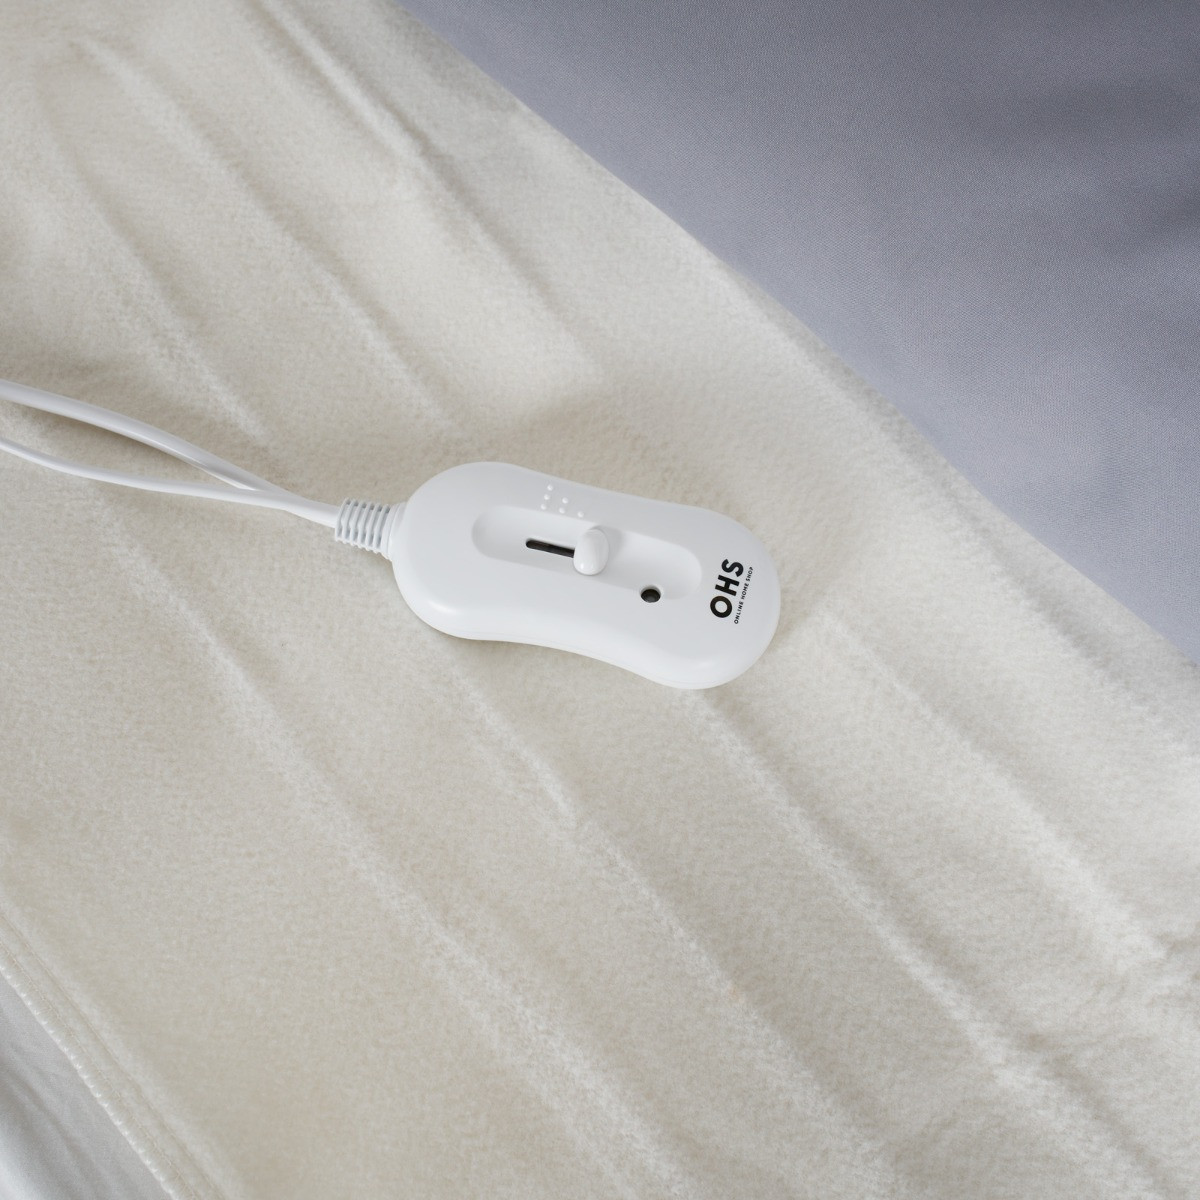 OHS Heated Under Electric Blanket, White - Double>